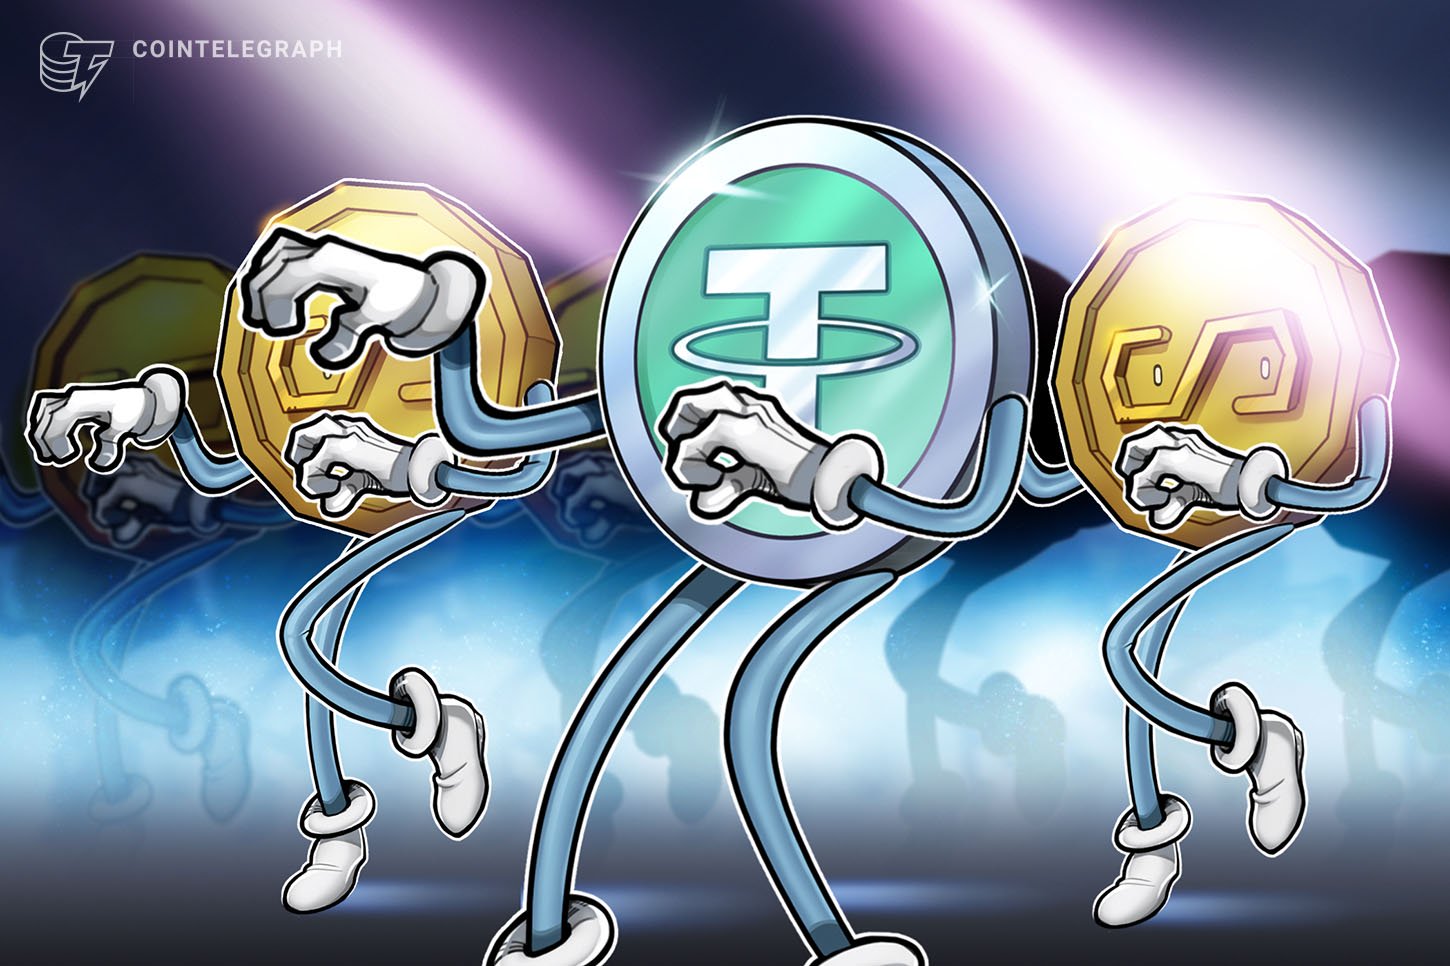 Tether Printer Isn’t Pumping Up Crypto Costs, Researchers Discover